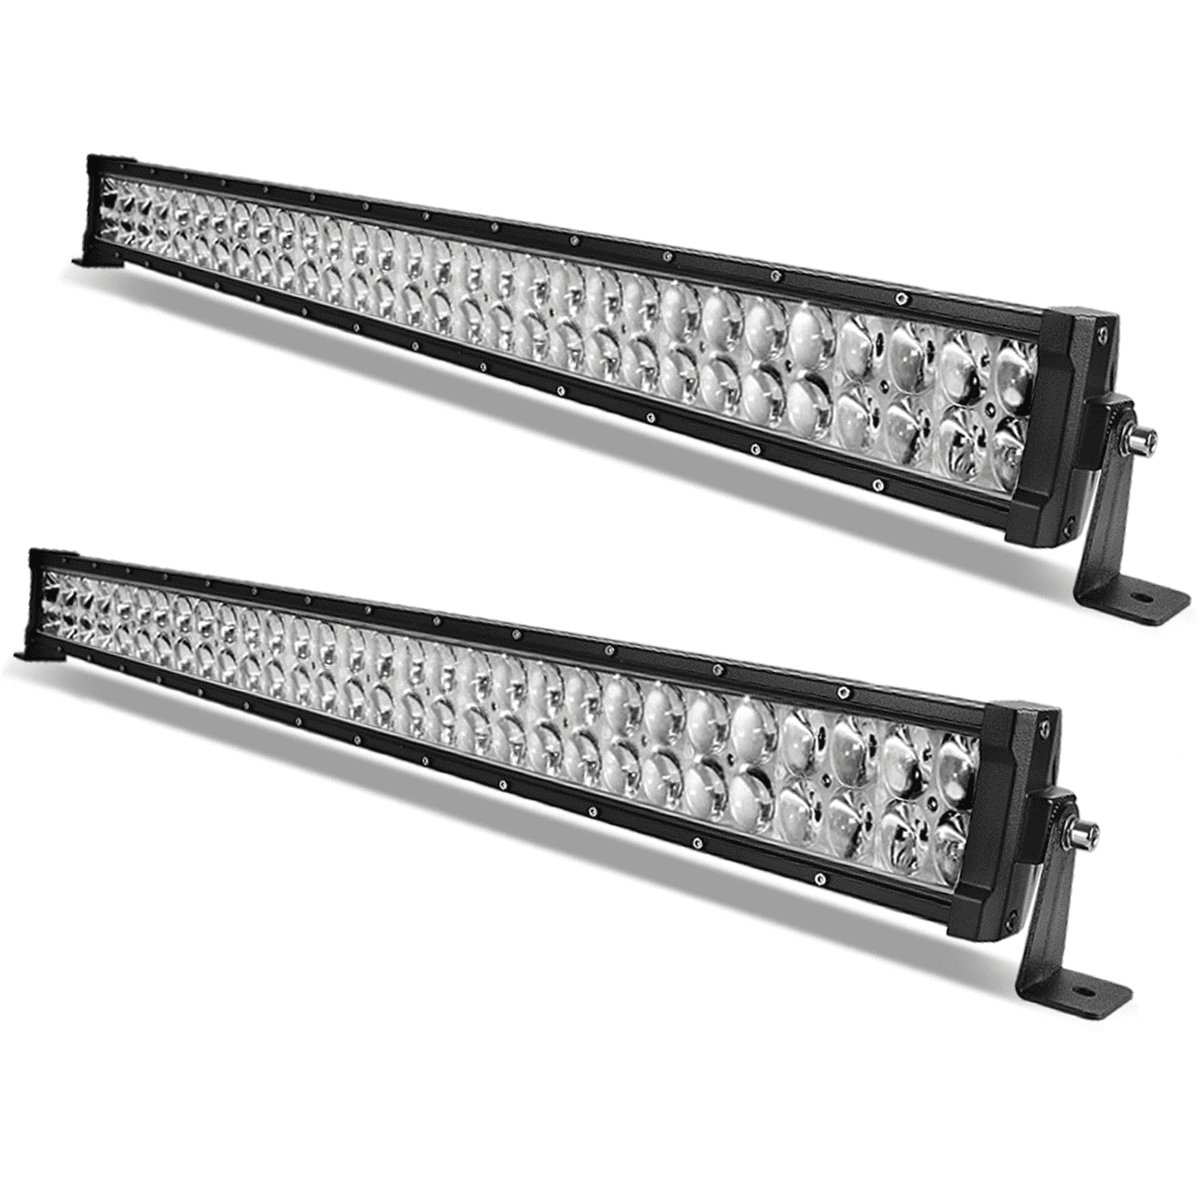 2X 6"inch 180W CREE LED Work Light Bar Flood Offroad For Jeep 4WD Pickup Fog 7" 